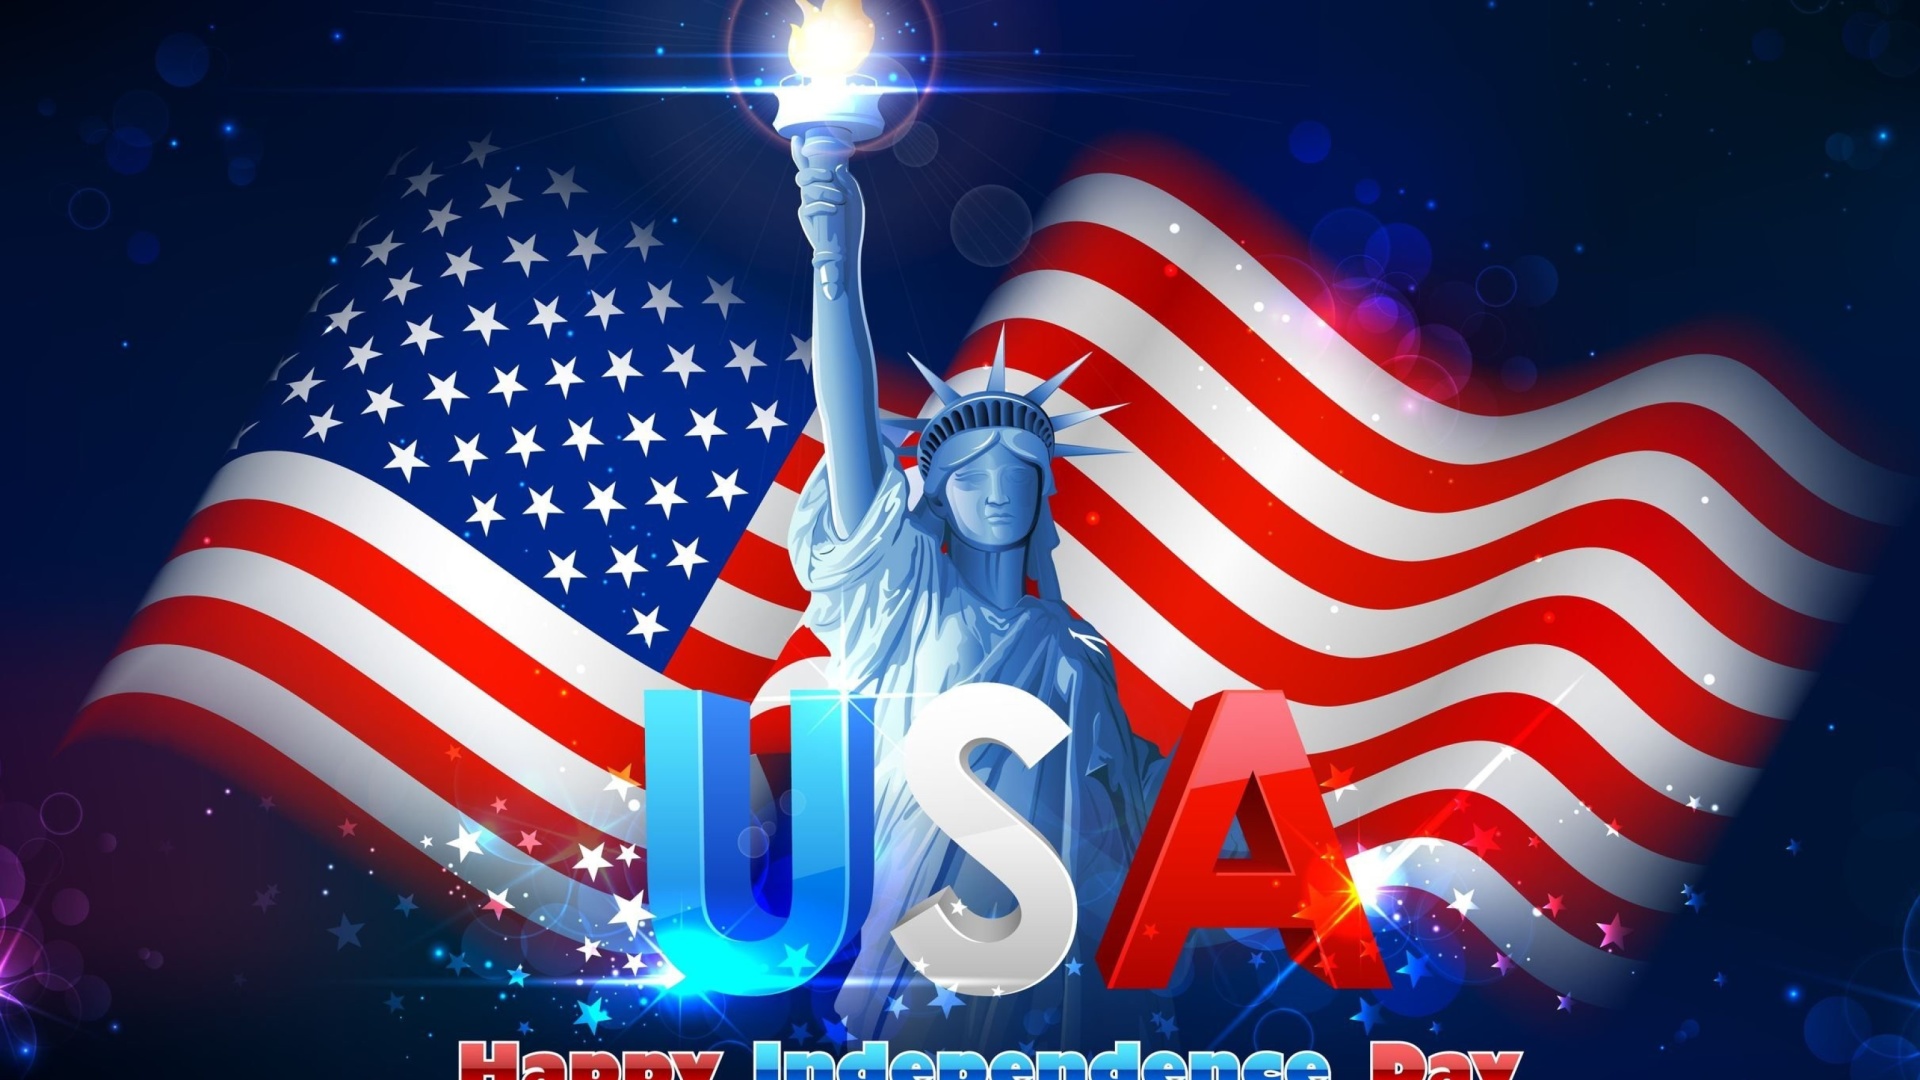 4TH JULY Independence Day USA wallpaper 1920x1080